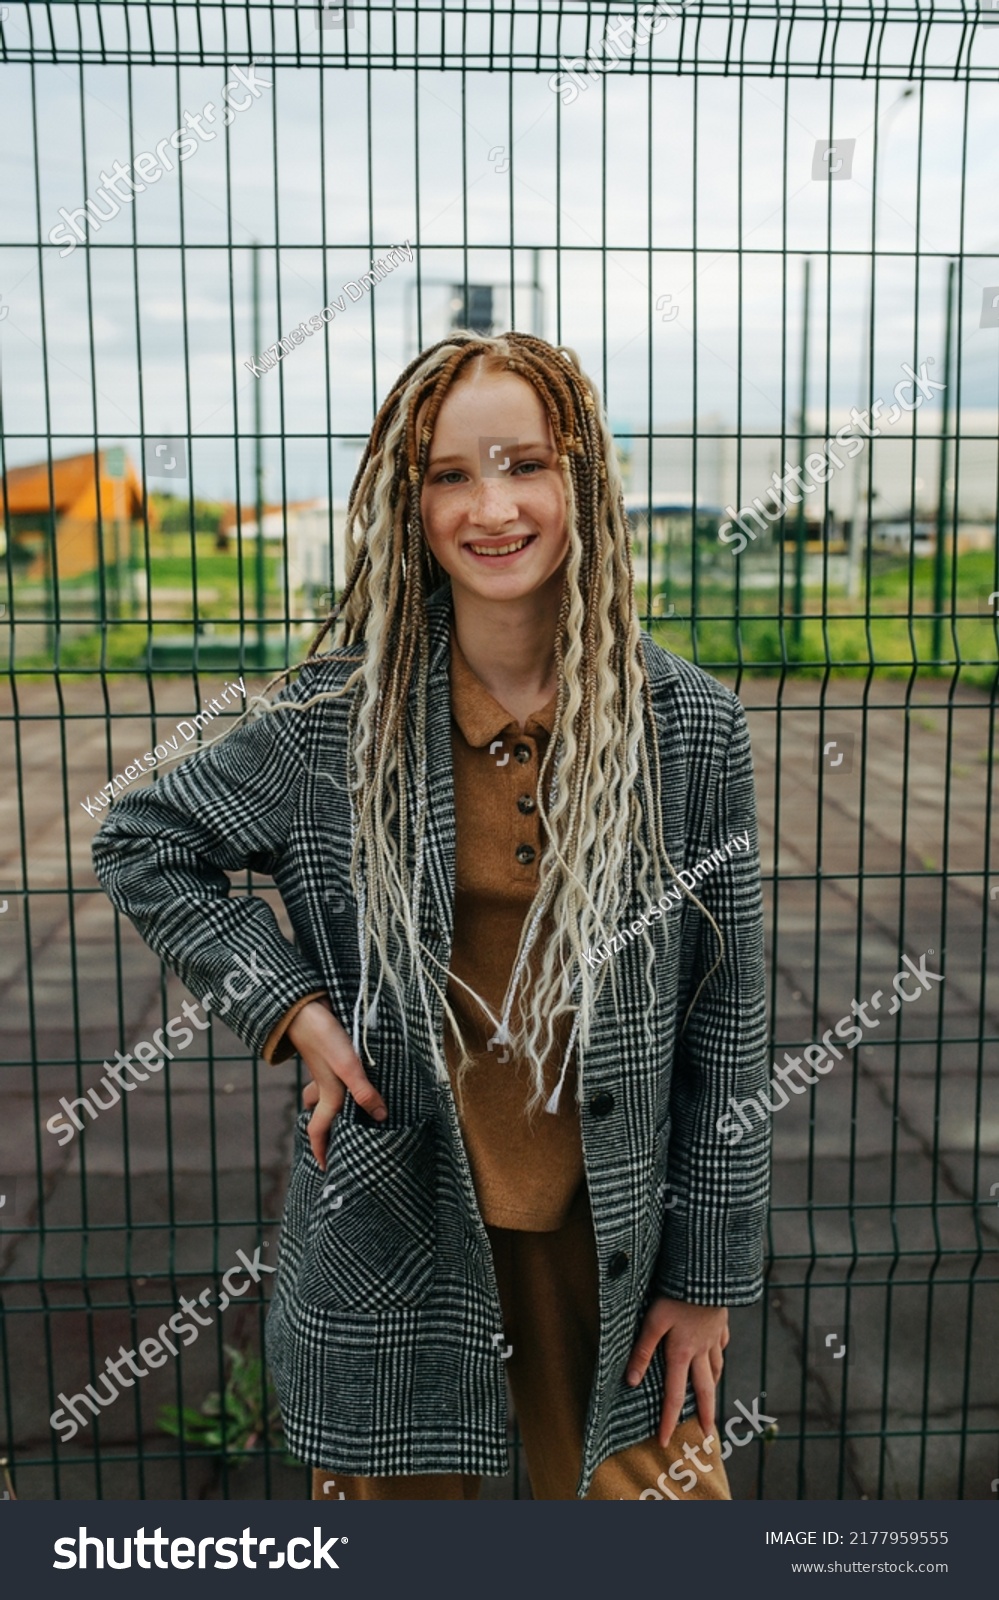 Lighthearted teenage girl with dreads standing in front of a metal fence. She is wearing a jacket. Portrait. #2177959555